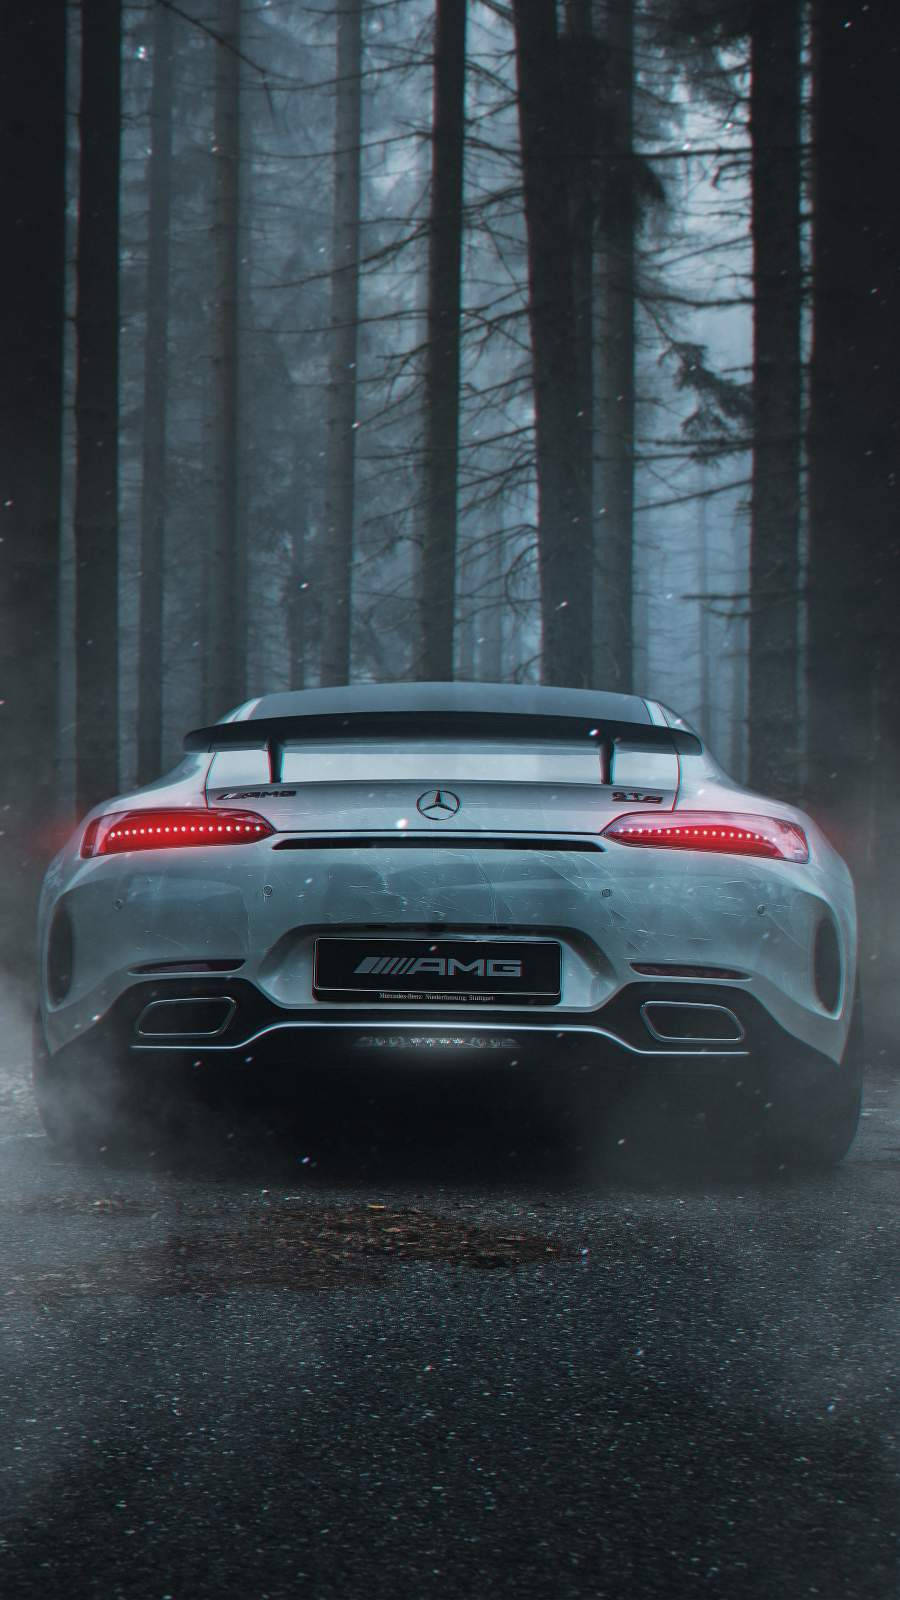 Back Of Mercedes-Benz AMG In Forest Wallpaper